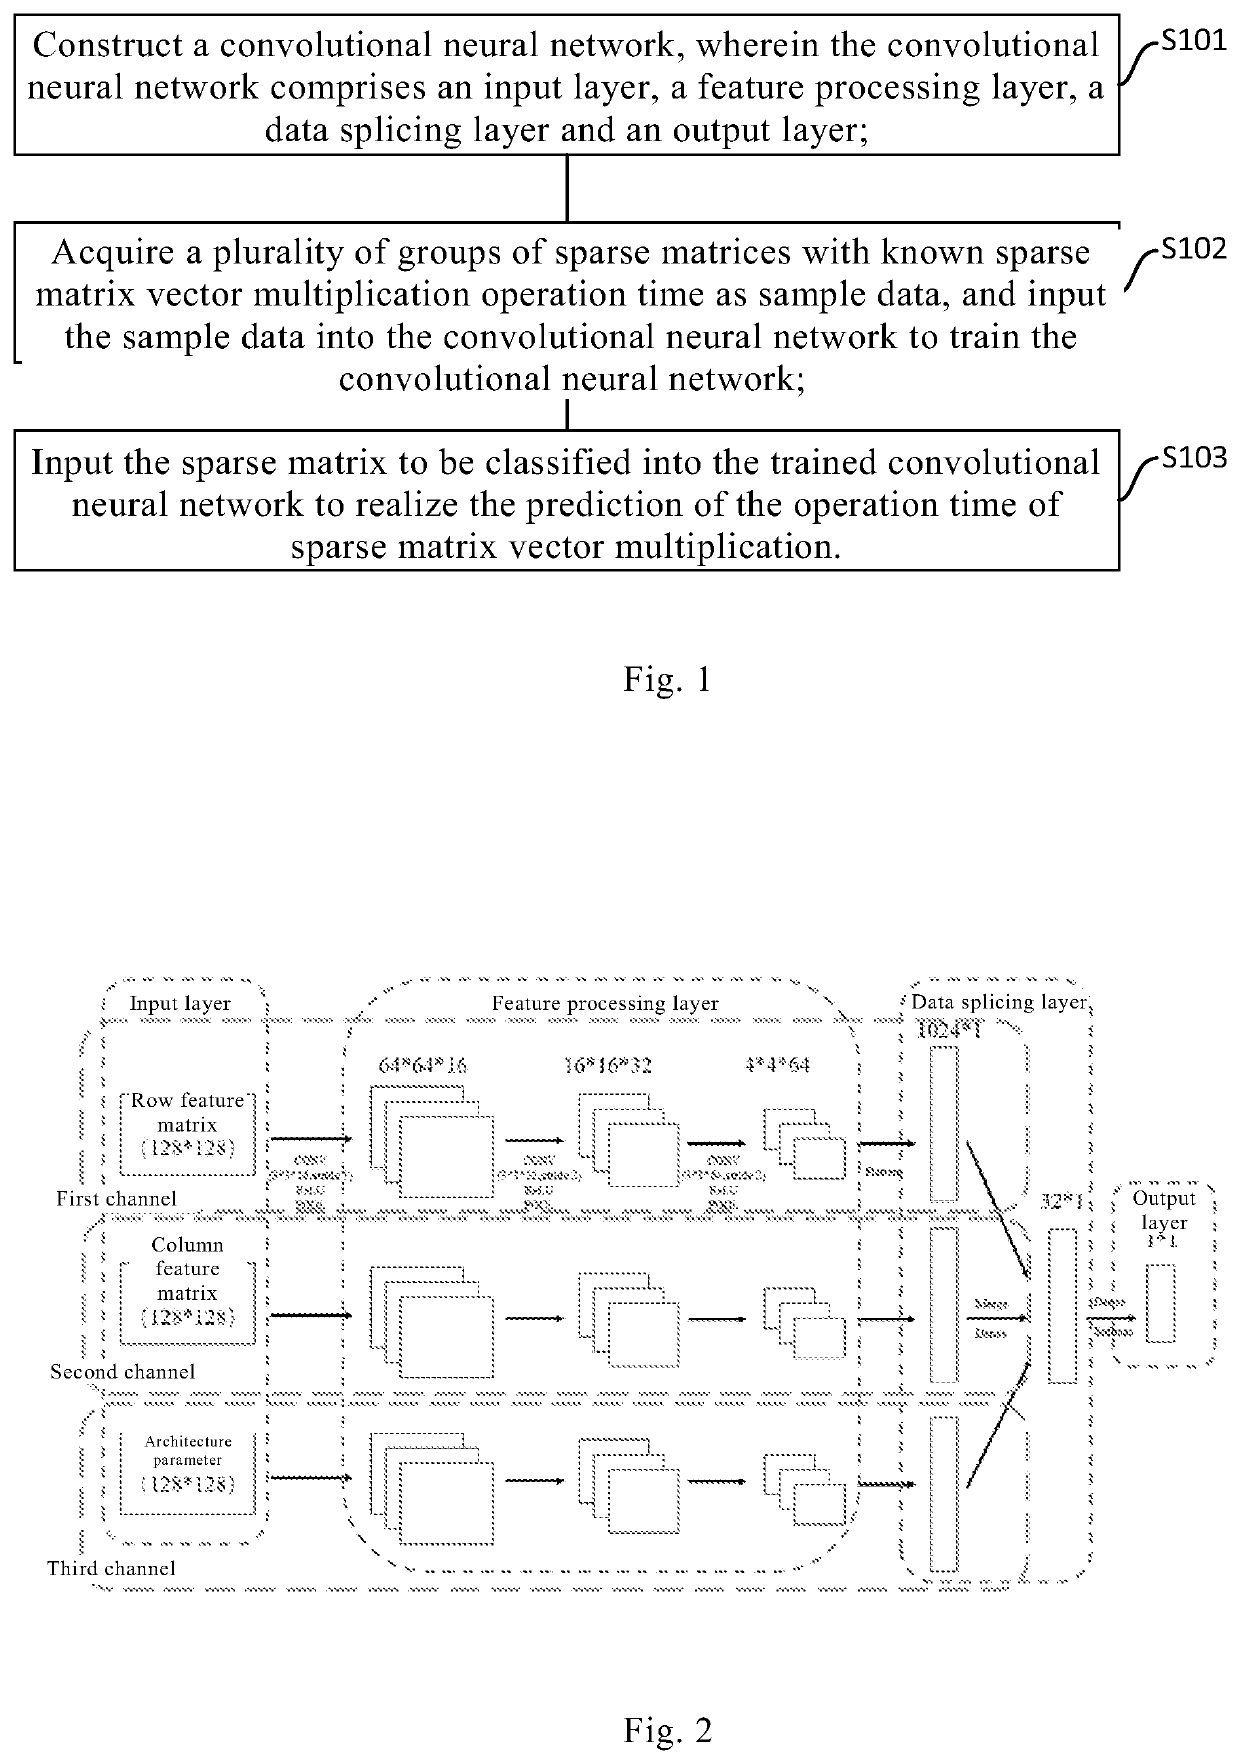 Method and System for Predicting Operation Time of Sparse Matrix Vector Multiplication